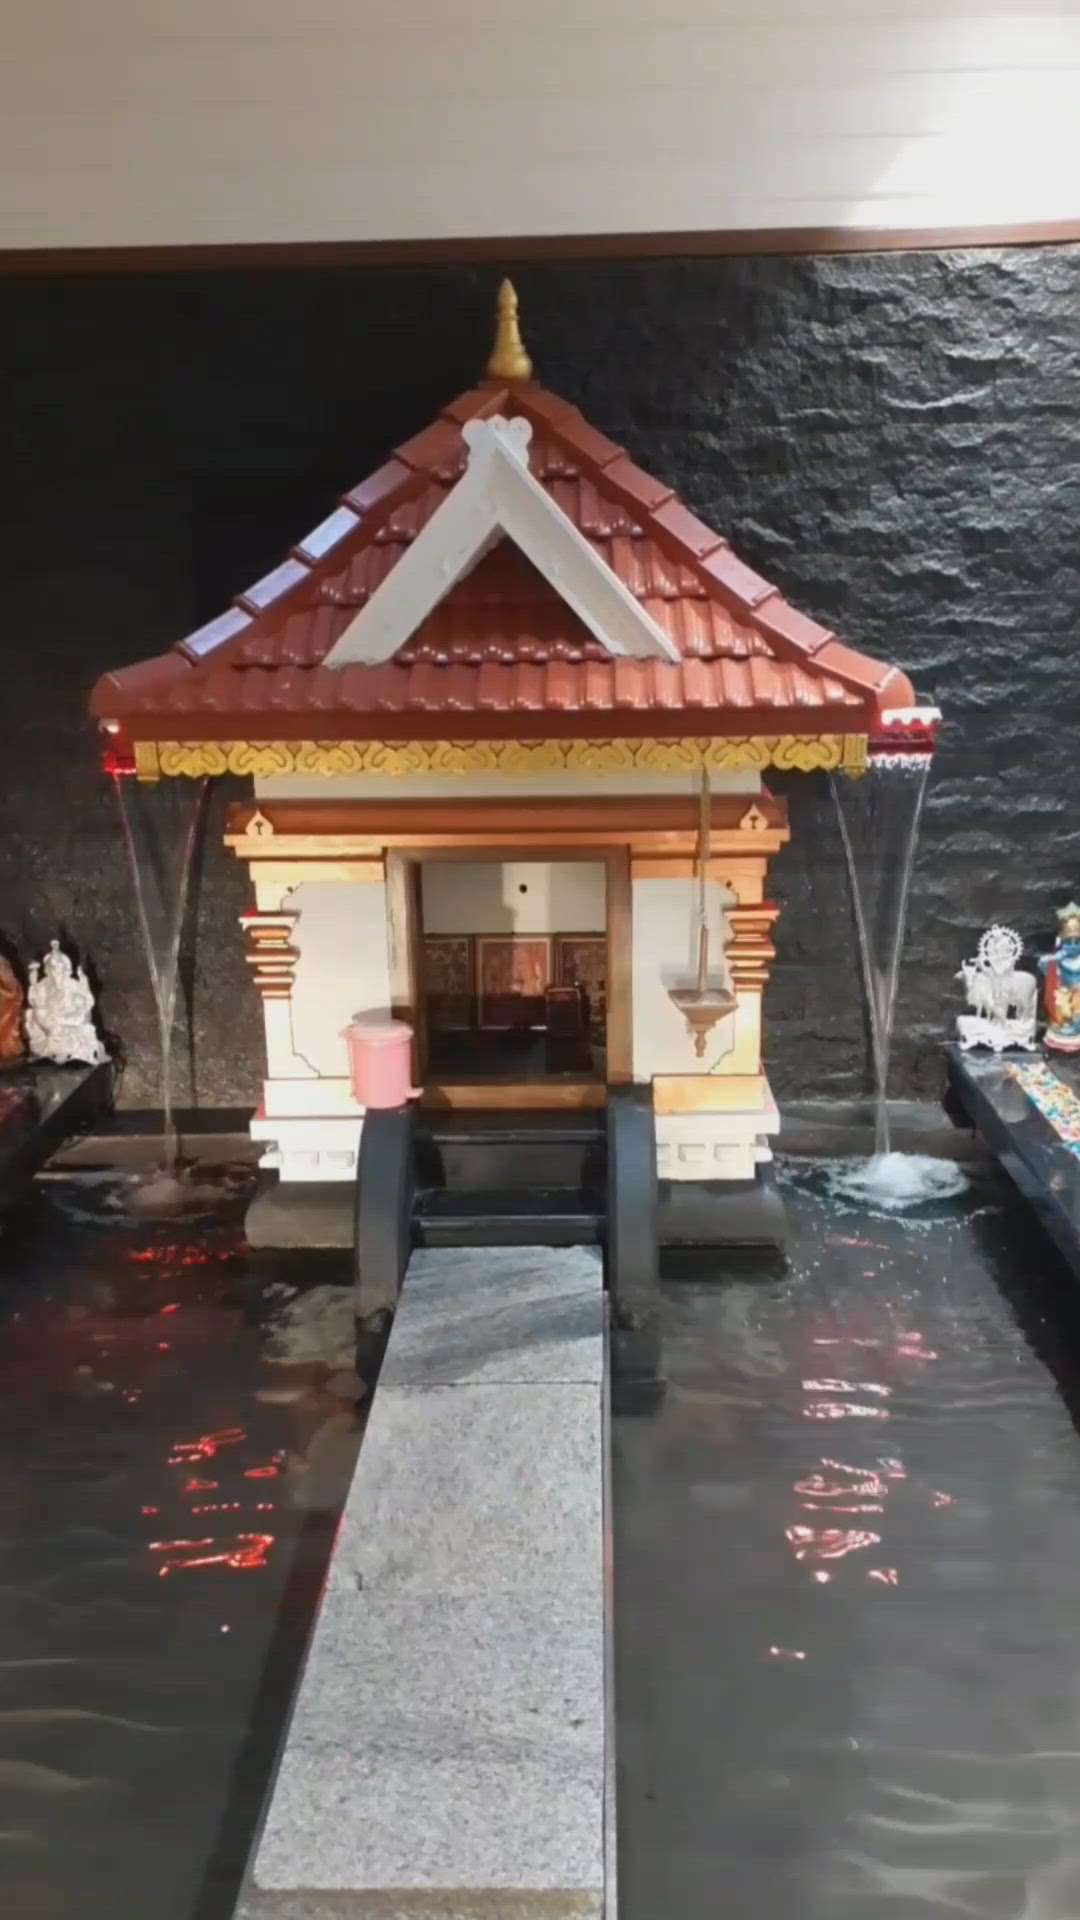 # Indoor Prayar Room with Koipond Including Waterfall Concept